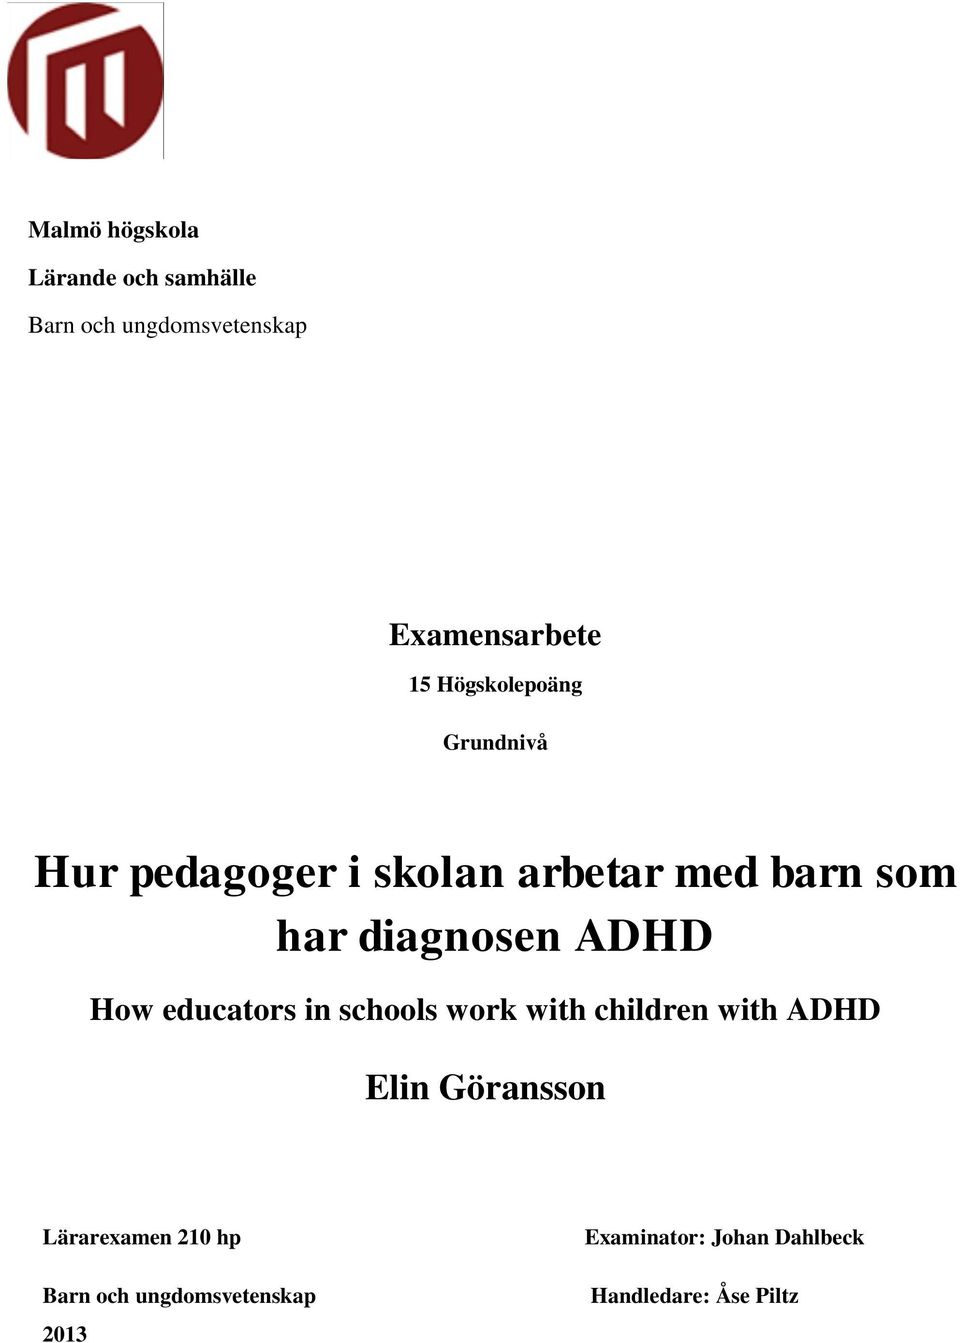 ADHD How educators in schools work with children with ADHD Elin Göransson